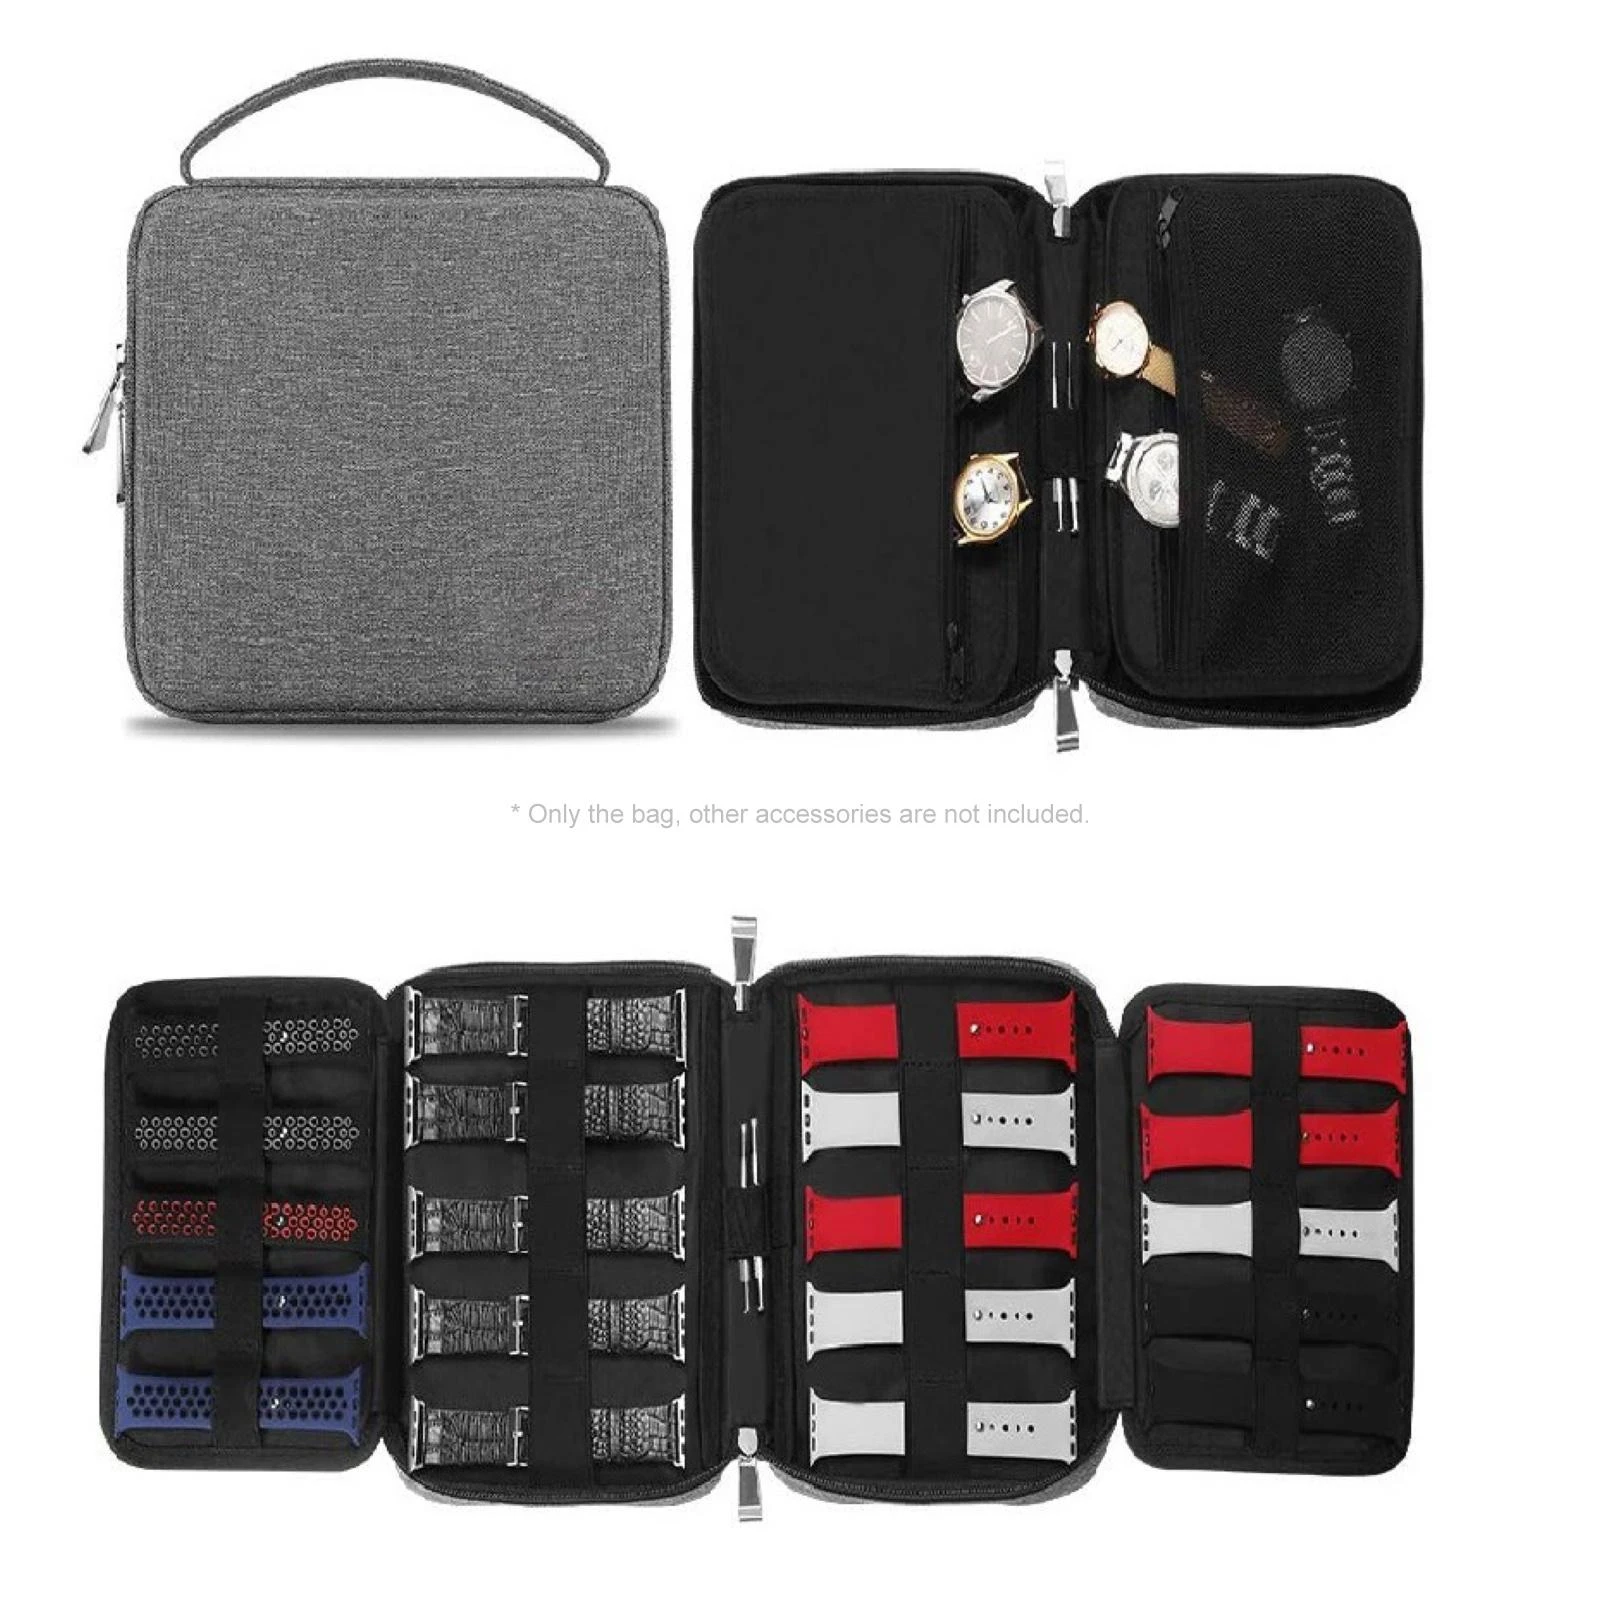 HOT SALES!!! New Arrival Portable Watch Band Strap Organizer Storage Bag USB Cable Carrier Travel Handbag Wholesale Dropshipping